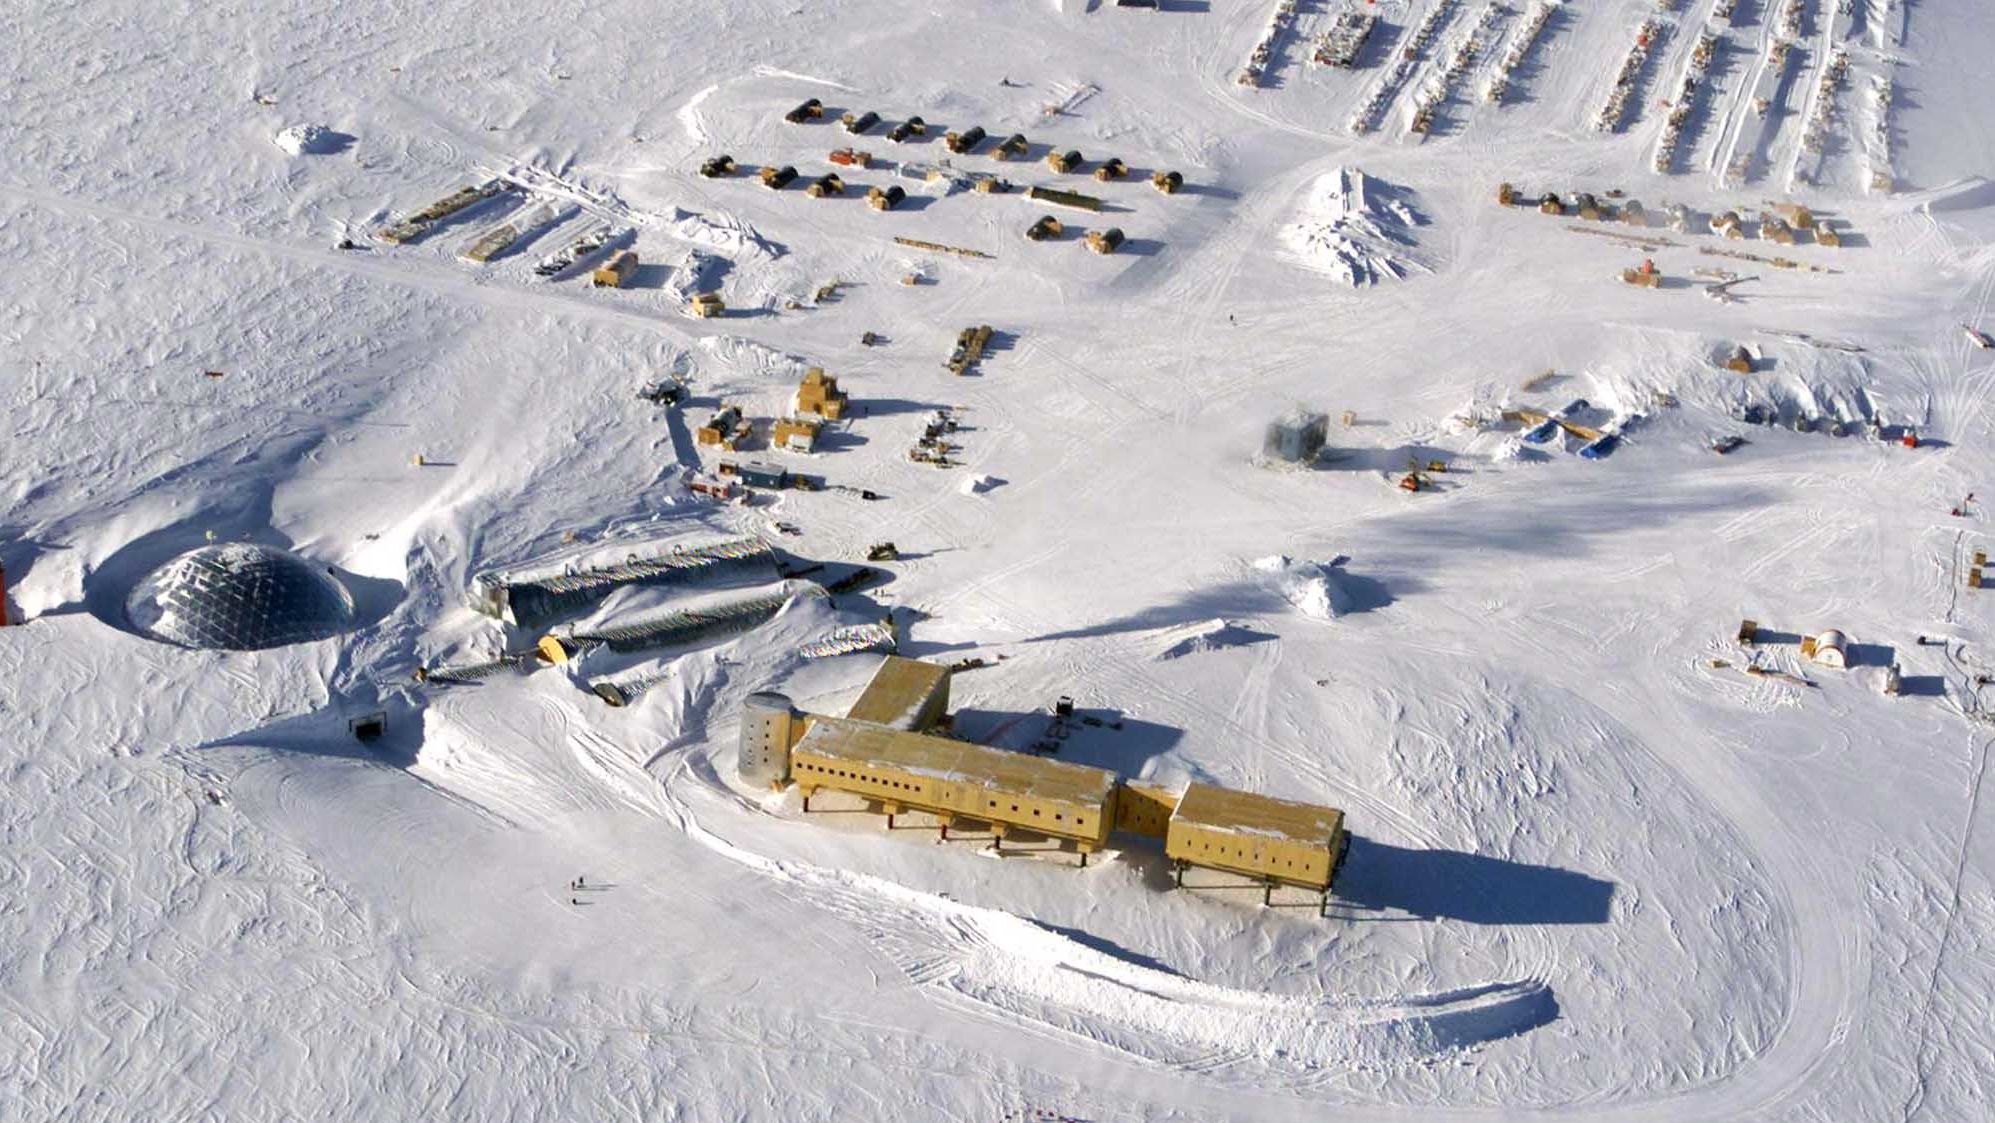 An aerial view of US Amundsen-Scott South Pole Station in Antarctica. New research shows that the South Pole has warmed three times the global average over the past three decades.